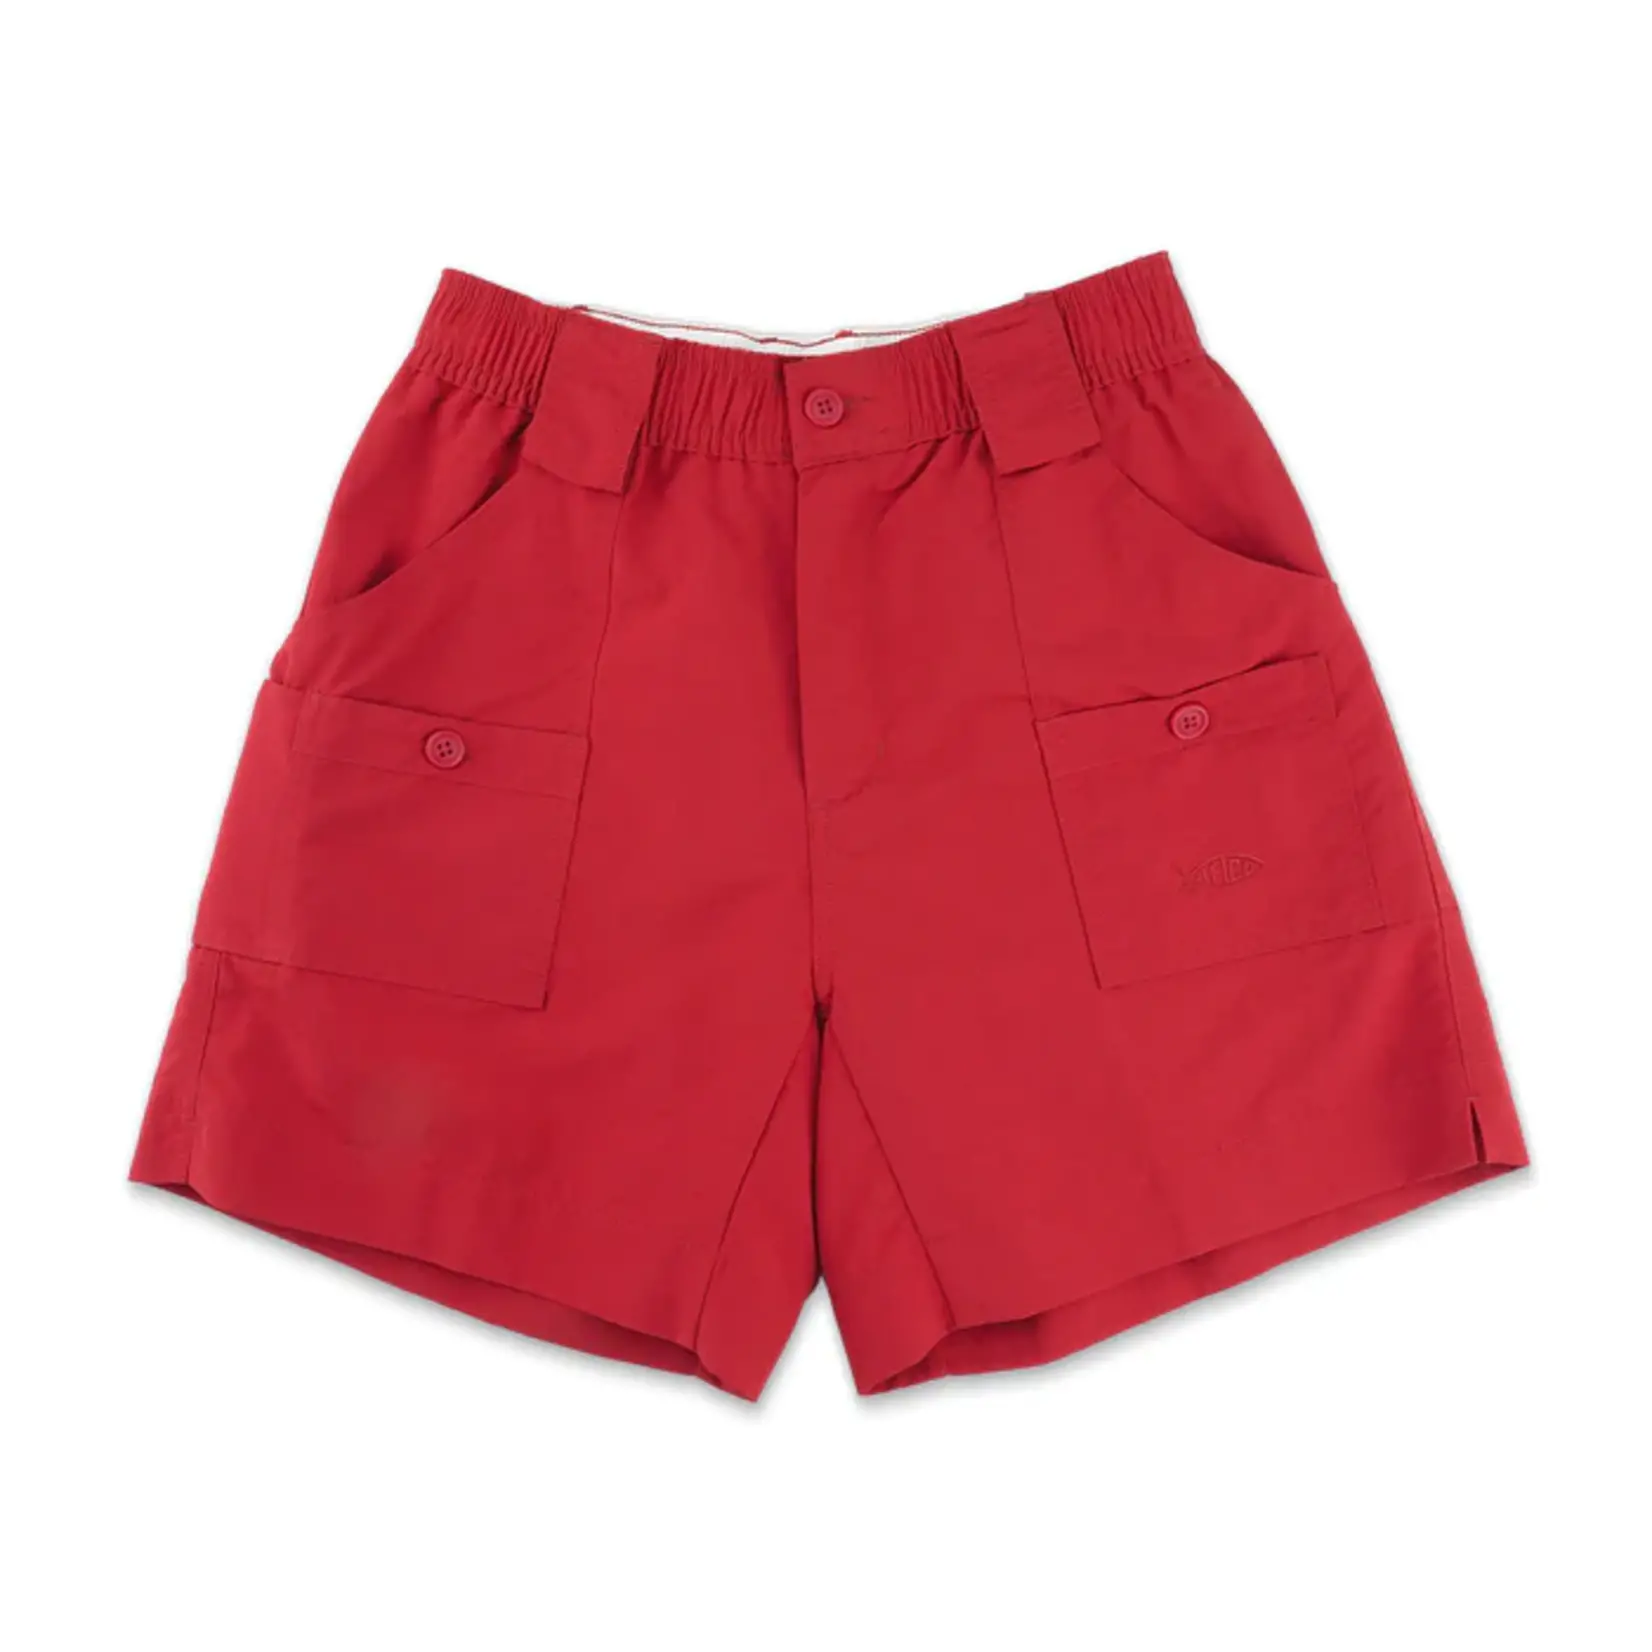 Aftco B01 Youth Boy's Original Fishing Shorts - EZN Outfitters